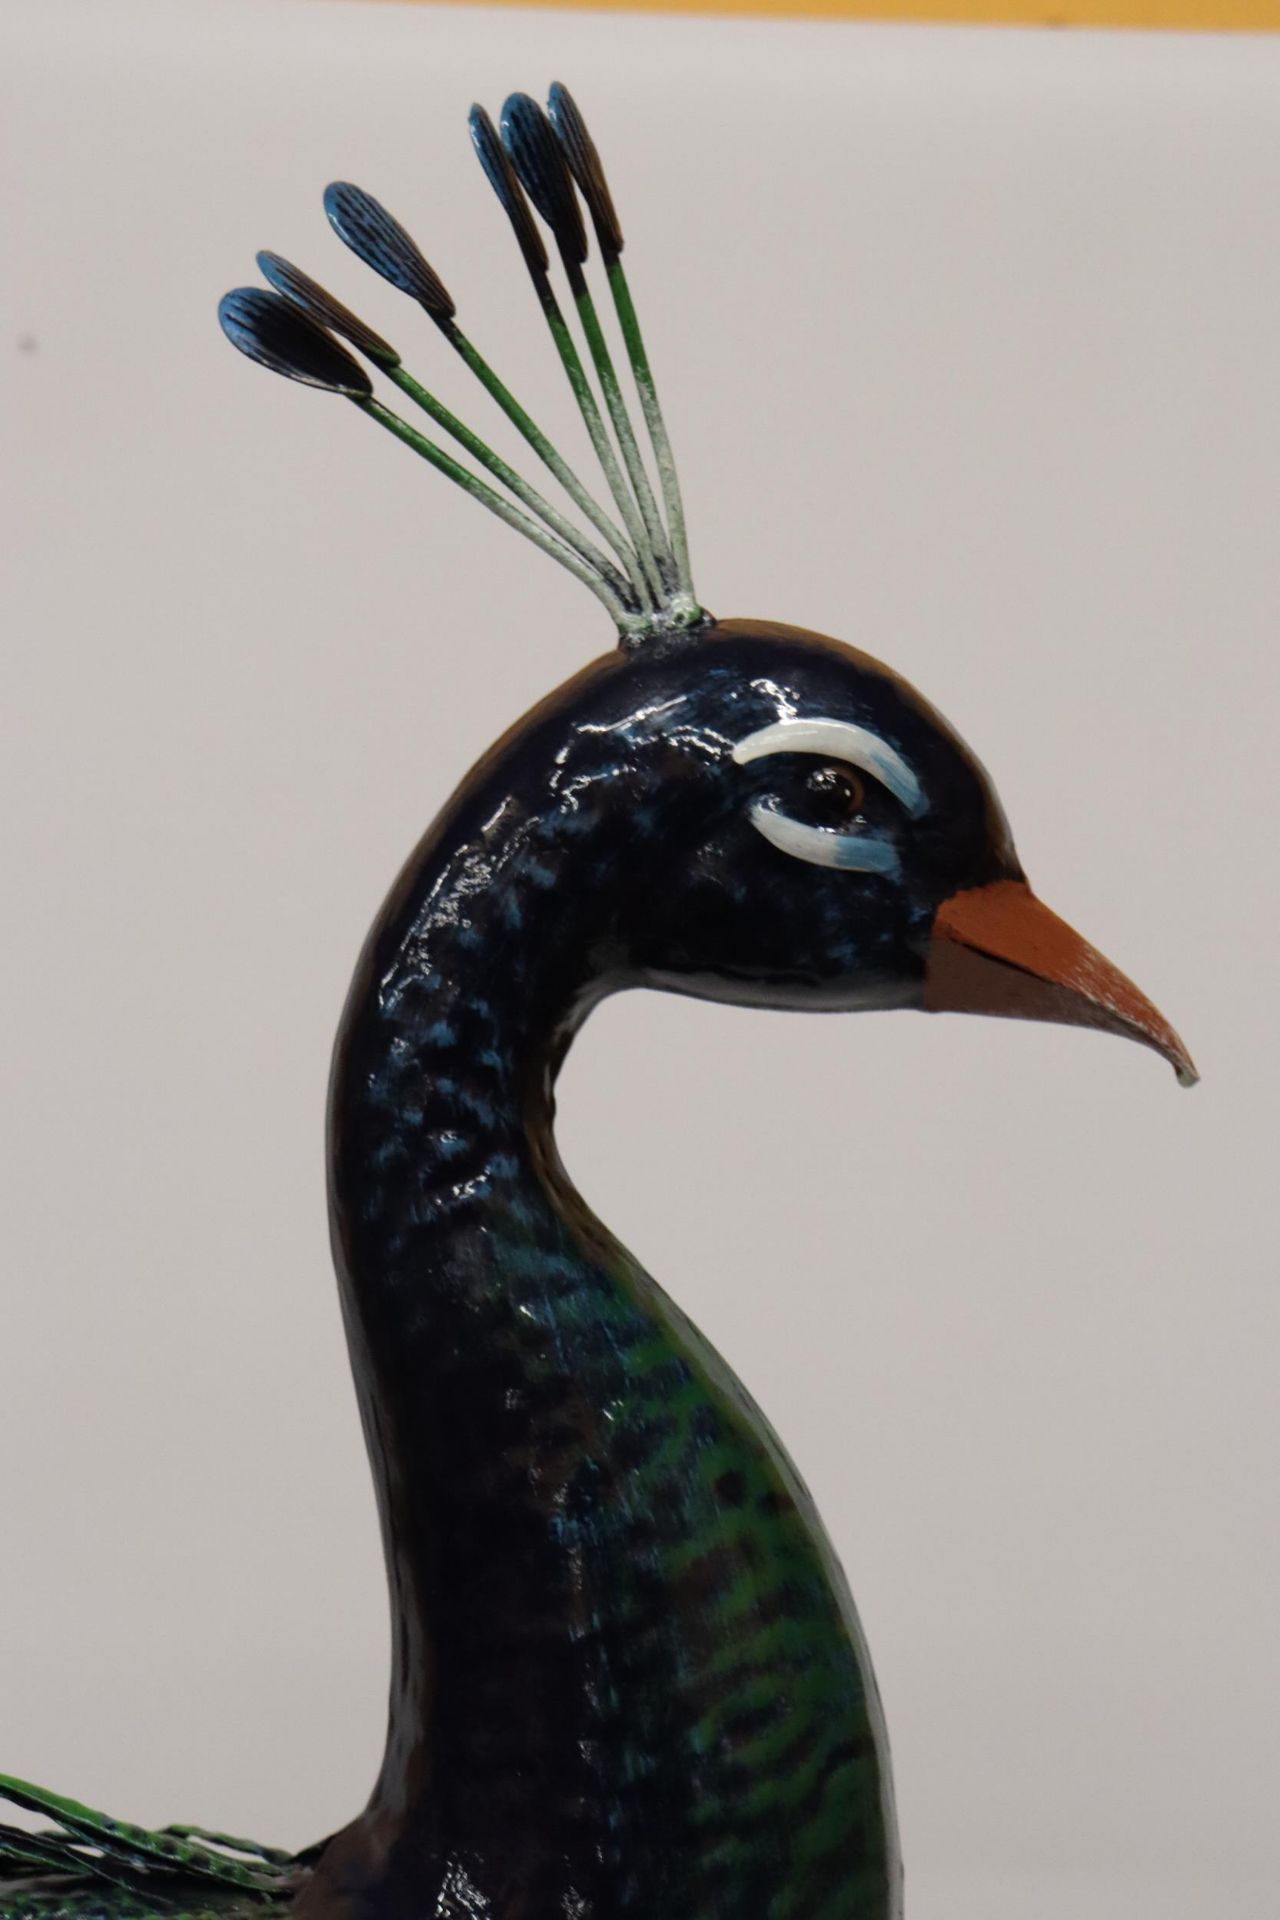 A HEAVY METAL PAINTED PEACOCK GARDEN ORNAMENT, 1 METRE HIGH - Image 8 of 8